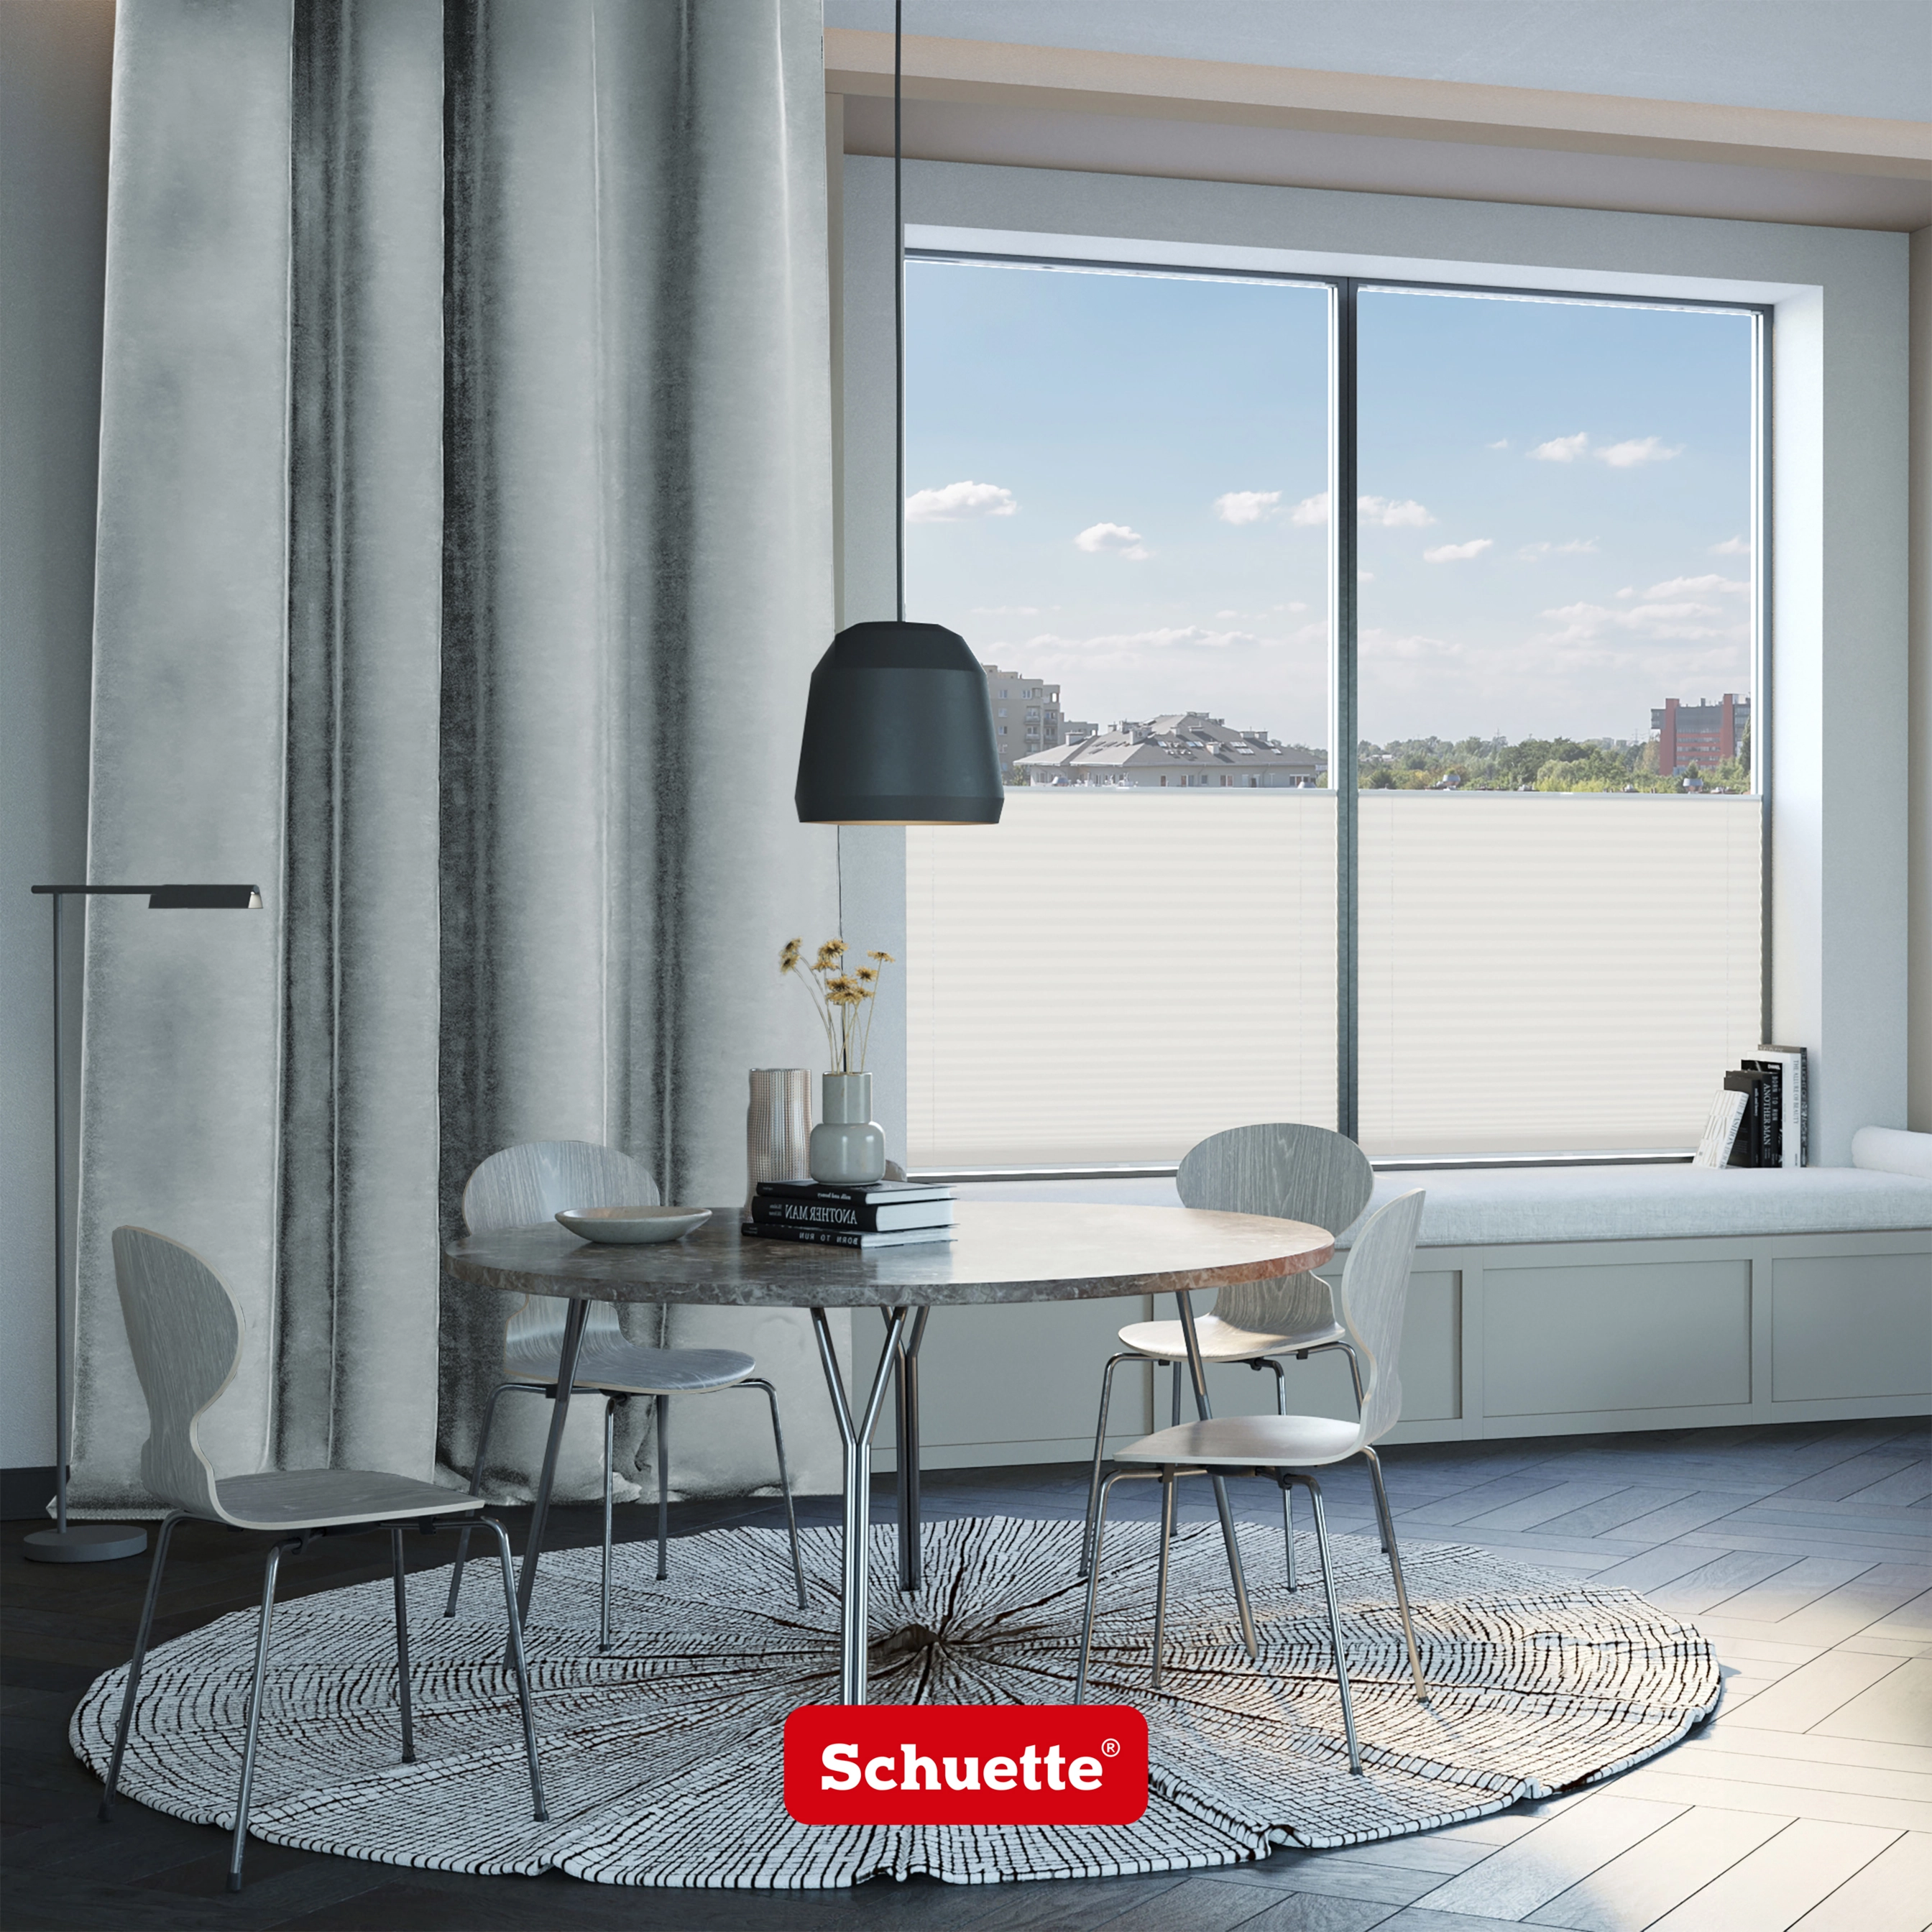 Schuette® Blackout Curtain with Eyelets ● Millenium Velvet Collection: Koala Shade (Grey) ● 1 piece ● Crease-resistant Easy-care Thermo Opaque & heavily darkening